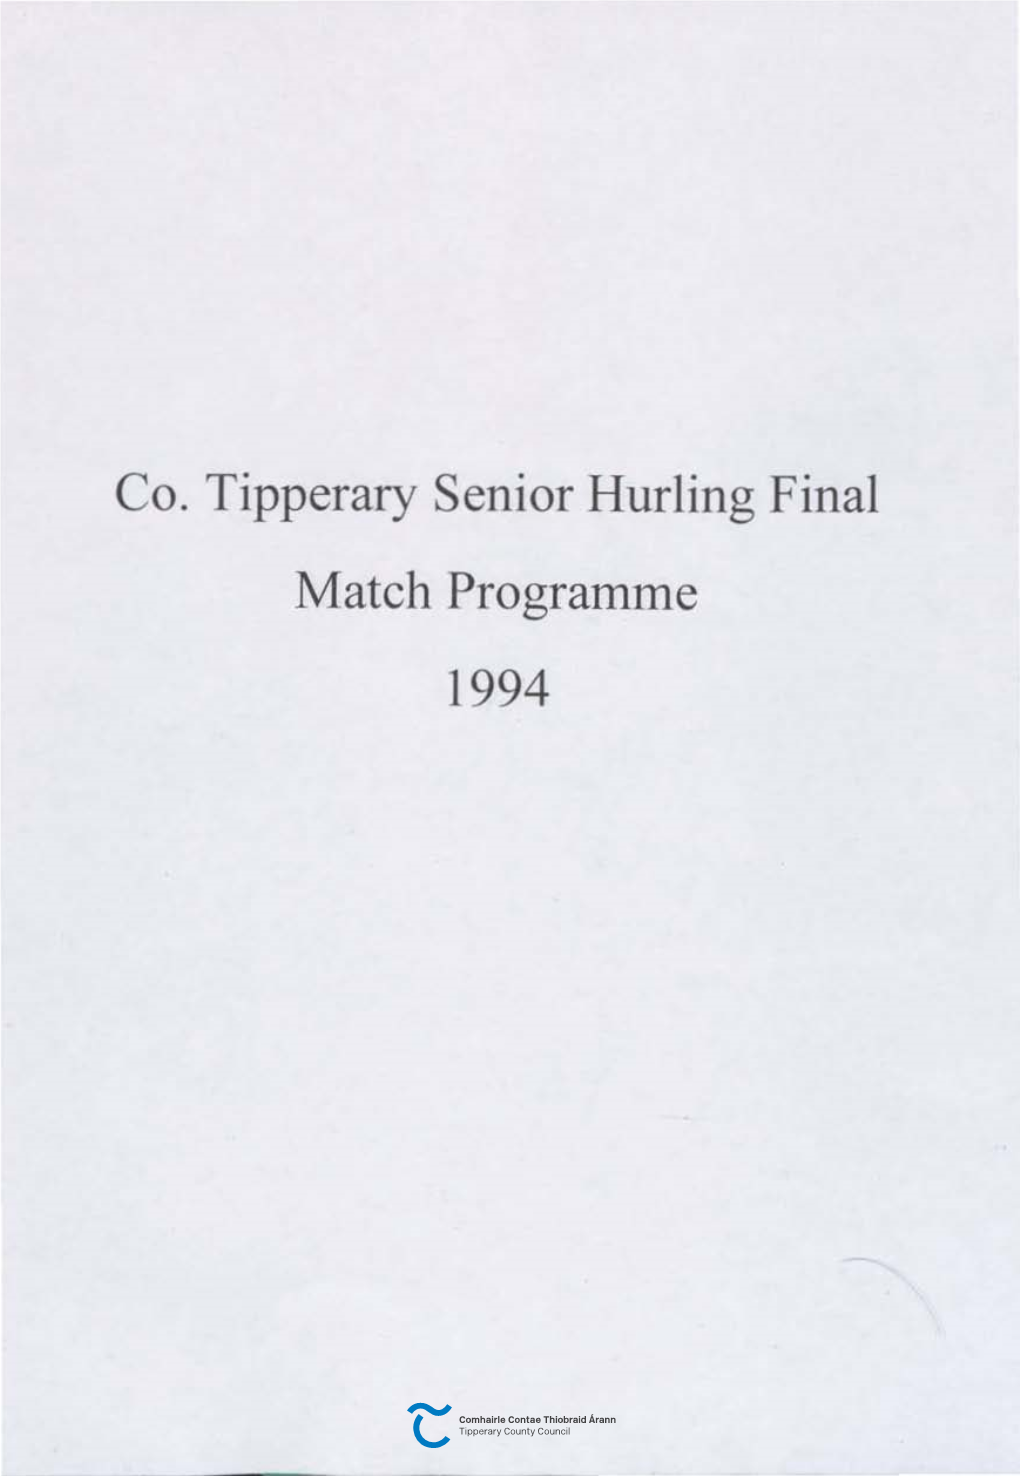 Co. Tipperary Senior Hurling Final Match Programme ]994 the NENAGH CO-UP F F F F TIPPERARY COUNTY F F F F* SENIOR HURLING FINAL F Fff Staid Semple, Durlas